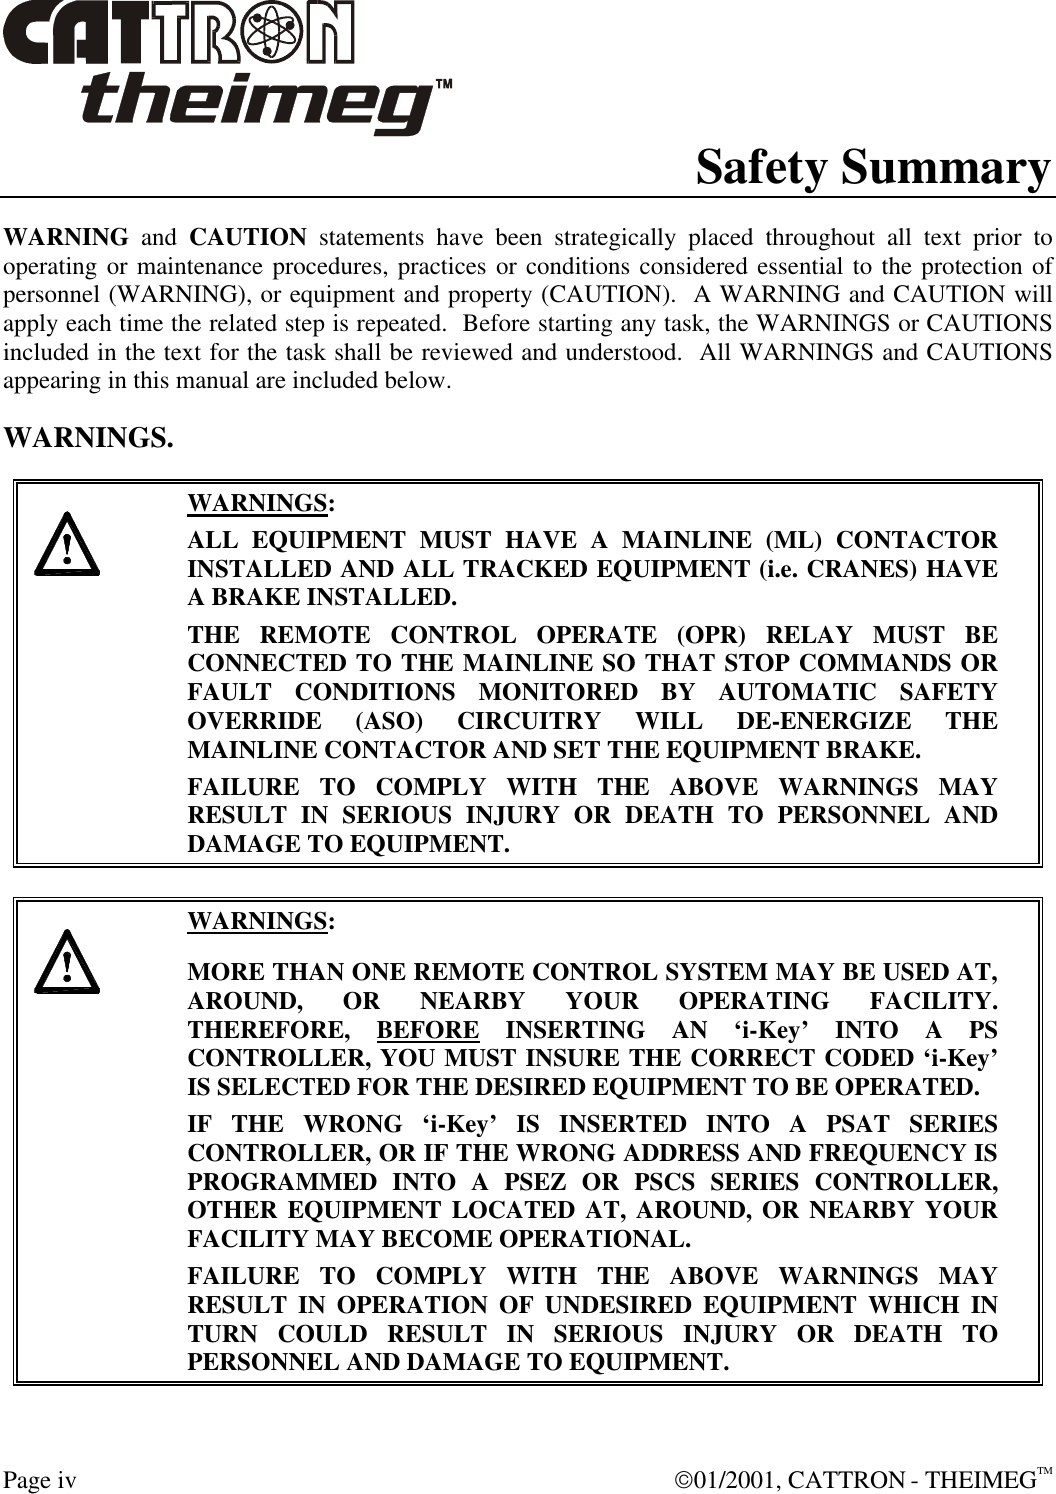  Page iv  01/2001, CATTRON - THEIMEGTM Safety Summary WARNING and CAUTION statements have been strategically placed throughout all text prior to operating or maintenance procedures, practices or conditions considered essential to the protection of personnel (WARNING), or equipment and property (CAUTION).  A WARNING and CAUTION will apply each time the related step is repeated.  Before starting any task, the WARNINGS or CAUTIONS included in the text for the task shall be reviewed and understood.  All WARNINGS and CAUTIONS appearing in this manual are included below. WARNINGS.     WARNINGS: ALL EQUIPMENT MUST HAVE A MAINLINE (ML) CONTACTOR INSTALLED AND ALL TRACKED EQUIPMENT (i.e. CRANES) HAVE A BRAKE INSTALLED. THE REMOTE CONTROL OPERATE (OPR) RELAY MUST BE CONNECTED TO THE MAINLINE SO THAT STOP COMMANDS OR FAULT CONDITIONS MONITORED BY AUTOMATIC SAFETY OVERRIDE (ASO) CIRCUITRY WILL DE-ENERGIZE THE MAINLINE CONTACTOR AND SET THE EQUIPMENT BRAKE.  FAILURE TO COMPLY WITH THE ABOVE WARNINGS MAY RESULT IN SERIOUS INJURY OR DEATH TO PERSONNEL AND DAMAGE TO EQUIPMENT.       WARNINGS: MORE THAN ONE REMOTE CONTROL SYSTEM MAY BE USED AT, AROUND, OR NEARBY YOUR OPERATING FACILITY.  THEREFORE, BEFORE INSERTING AN ‘i-Key’ INTO A PS CONTROLLER, YOU MUST INSURE THE CORRECT CODED ‘i-Key’ IS SELECTED FOR THE DESIRED EQUIPMENT TO BE OPERATED. IF THE WRONG ‘i-Key’ IS INSERTED INTO A PSAT SERIES CONTROLLER, OR IF THE WRONG ADDRESS AND FREQUENCY IS PROGRAMMED INTO A PSEZ OR PSCS SERIES CONTROLLER, OTHER EQUIPMENT LOCATED AT, AROUND, OR NEARBY YOUR FACILITY MAY BECOME OPERATIONAL. FAILURE TO COMPLY WITH THE ABOVE WARNINGS MAY RESULT IN OPERATION OF UNDESIRED EQUIPMENT WHICH IN TURN COULD RESULT IN SERIOUS INJURY OR DEATH TO PERSONNEL AND DAMAGE TO EQUIPMENT.  